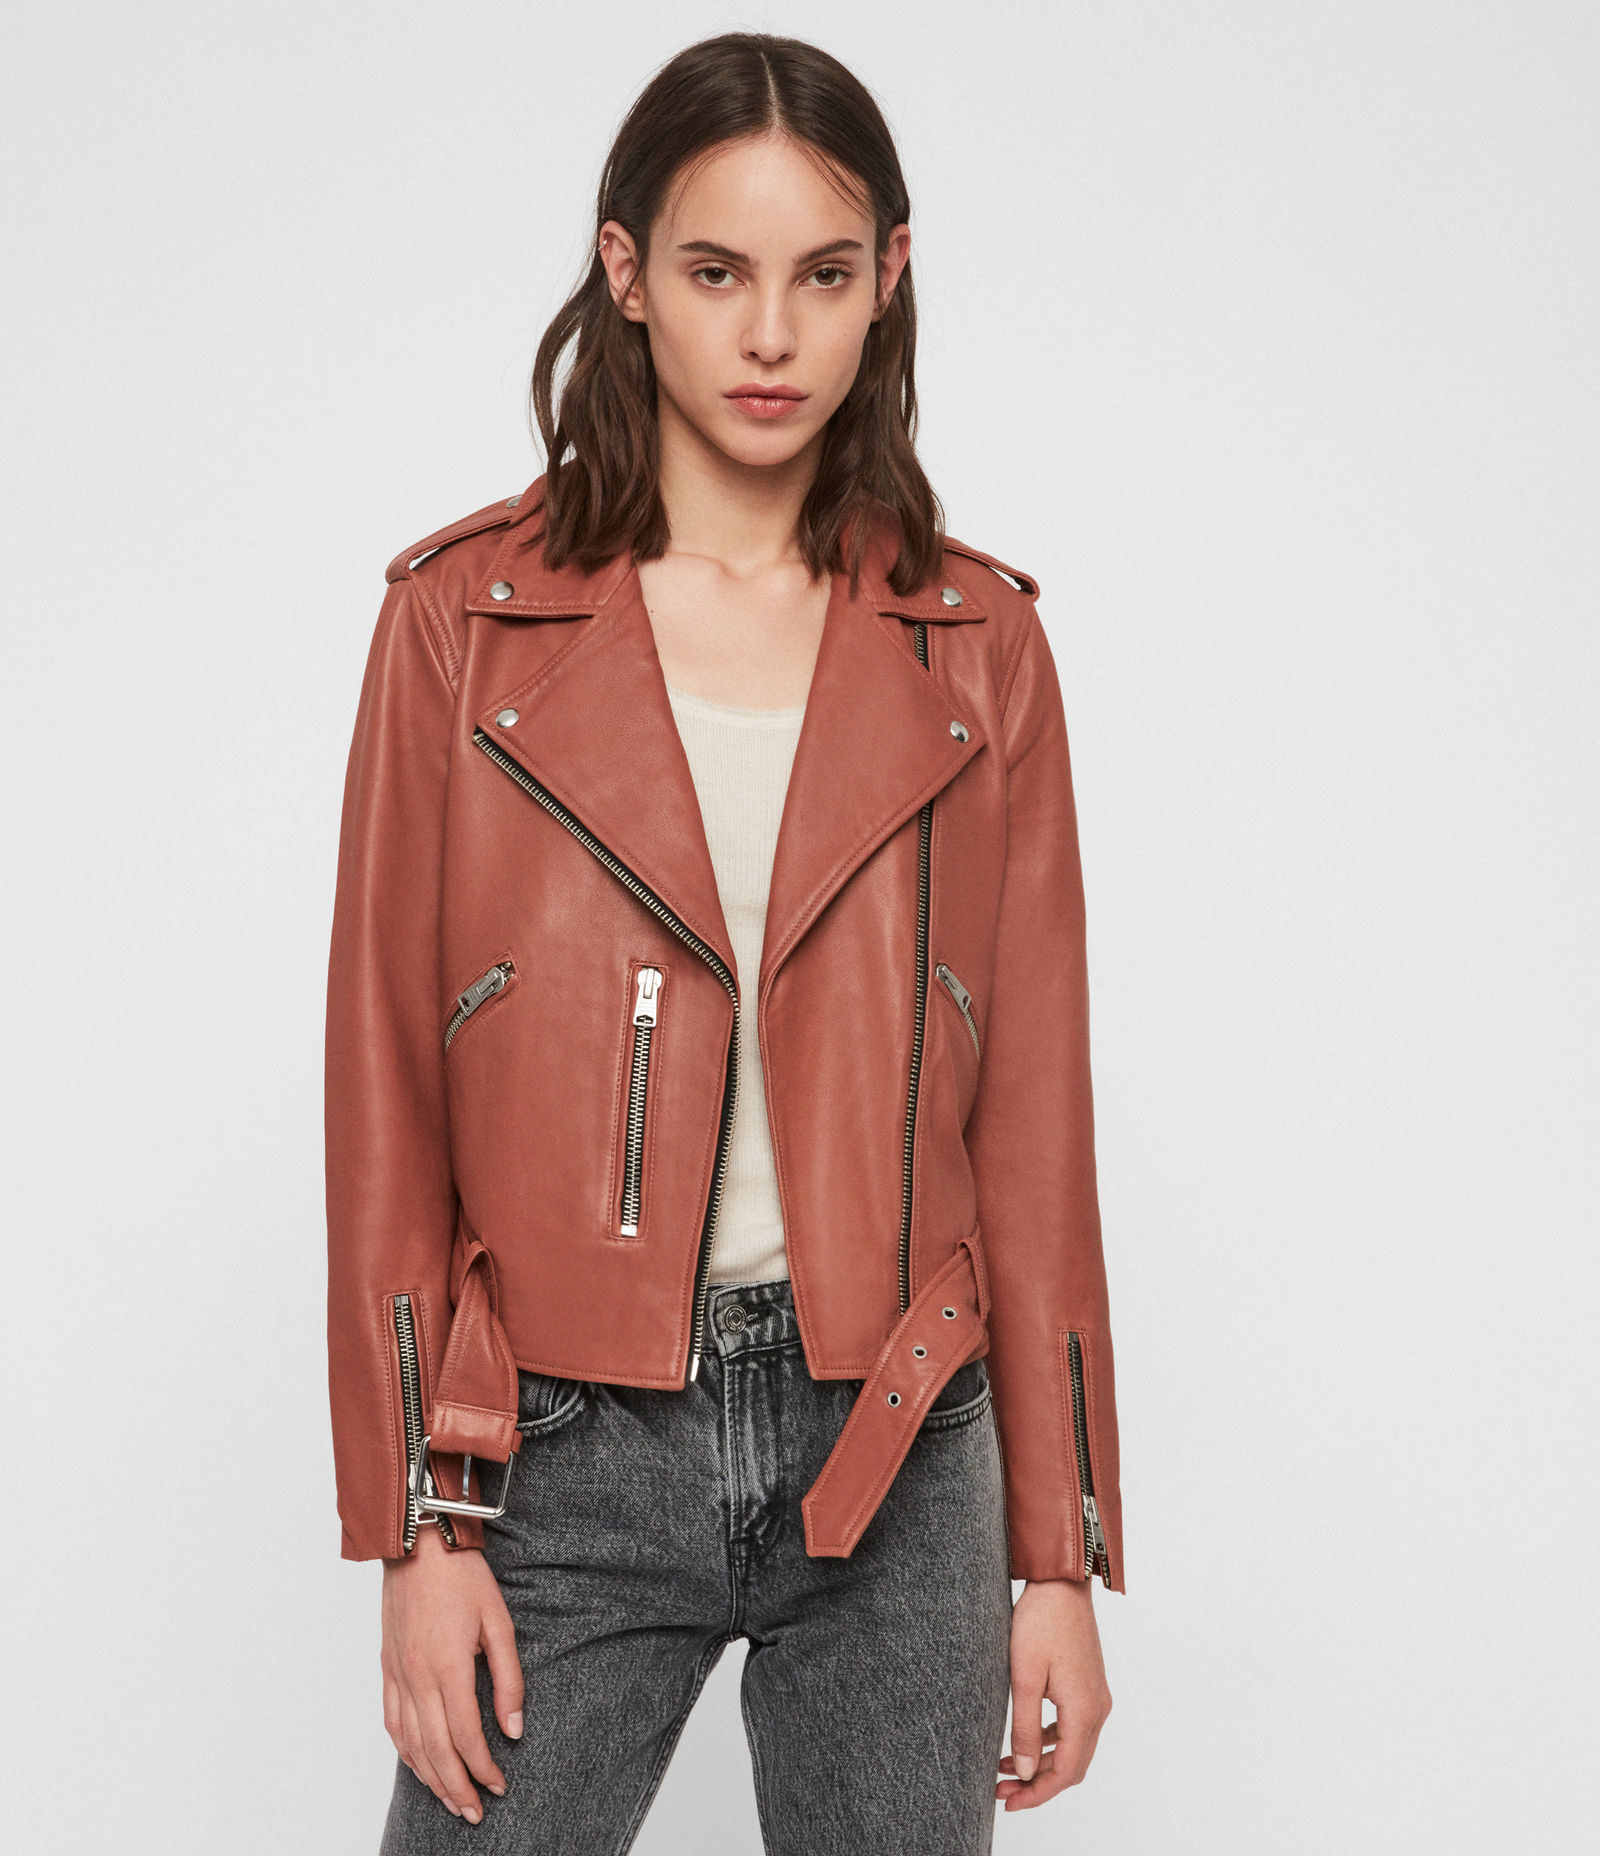 Time To Refresh Your Wardrobe Via This Amazing AllSaints Sale